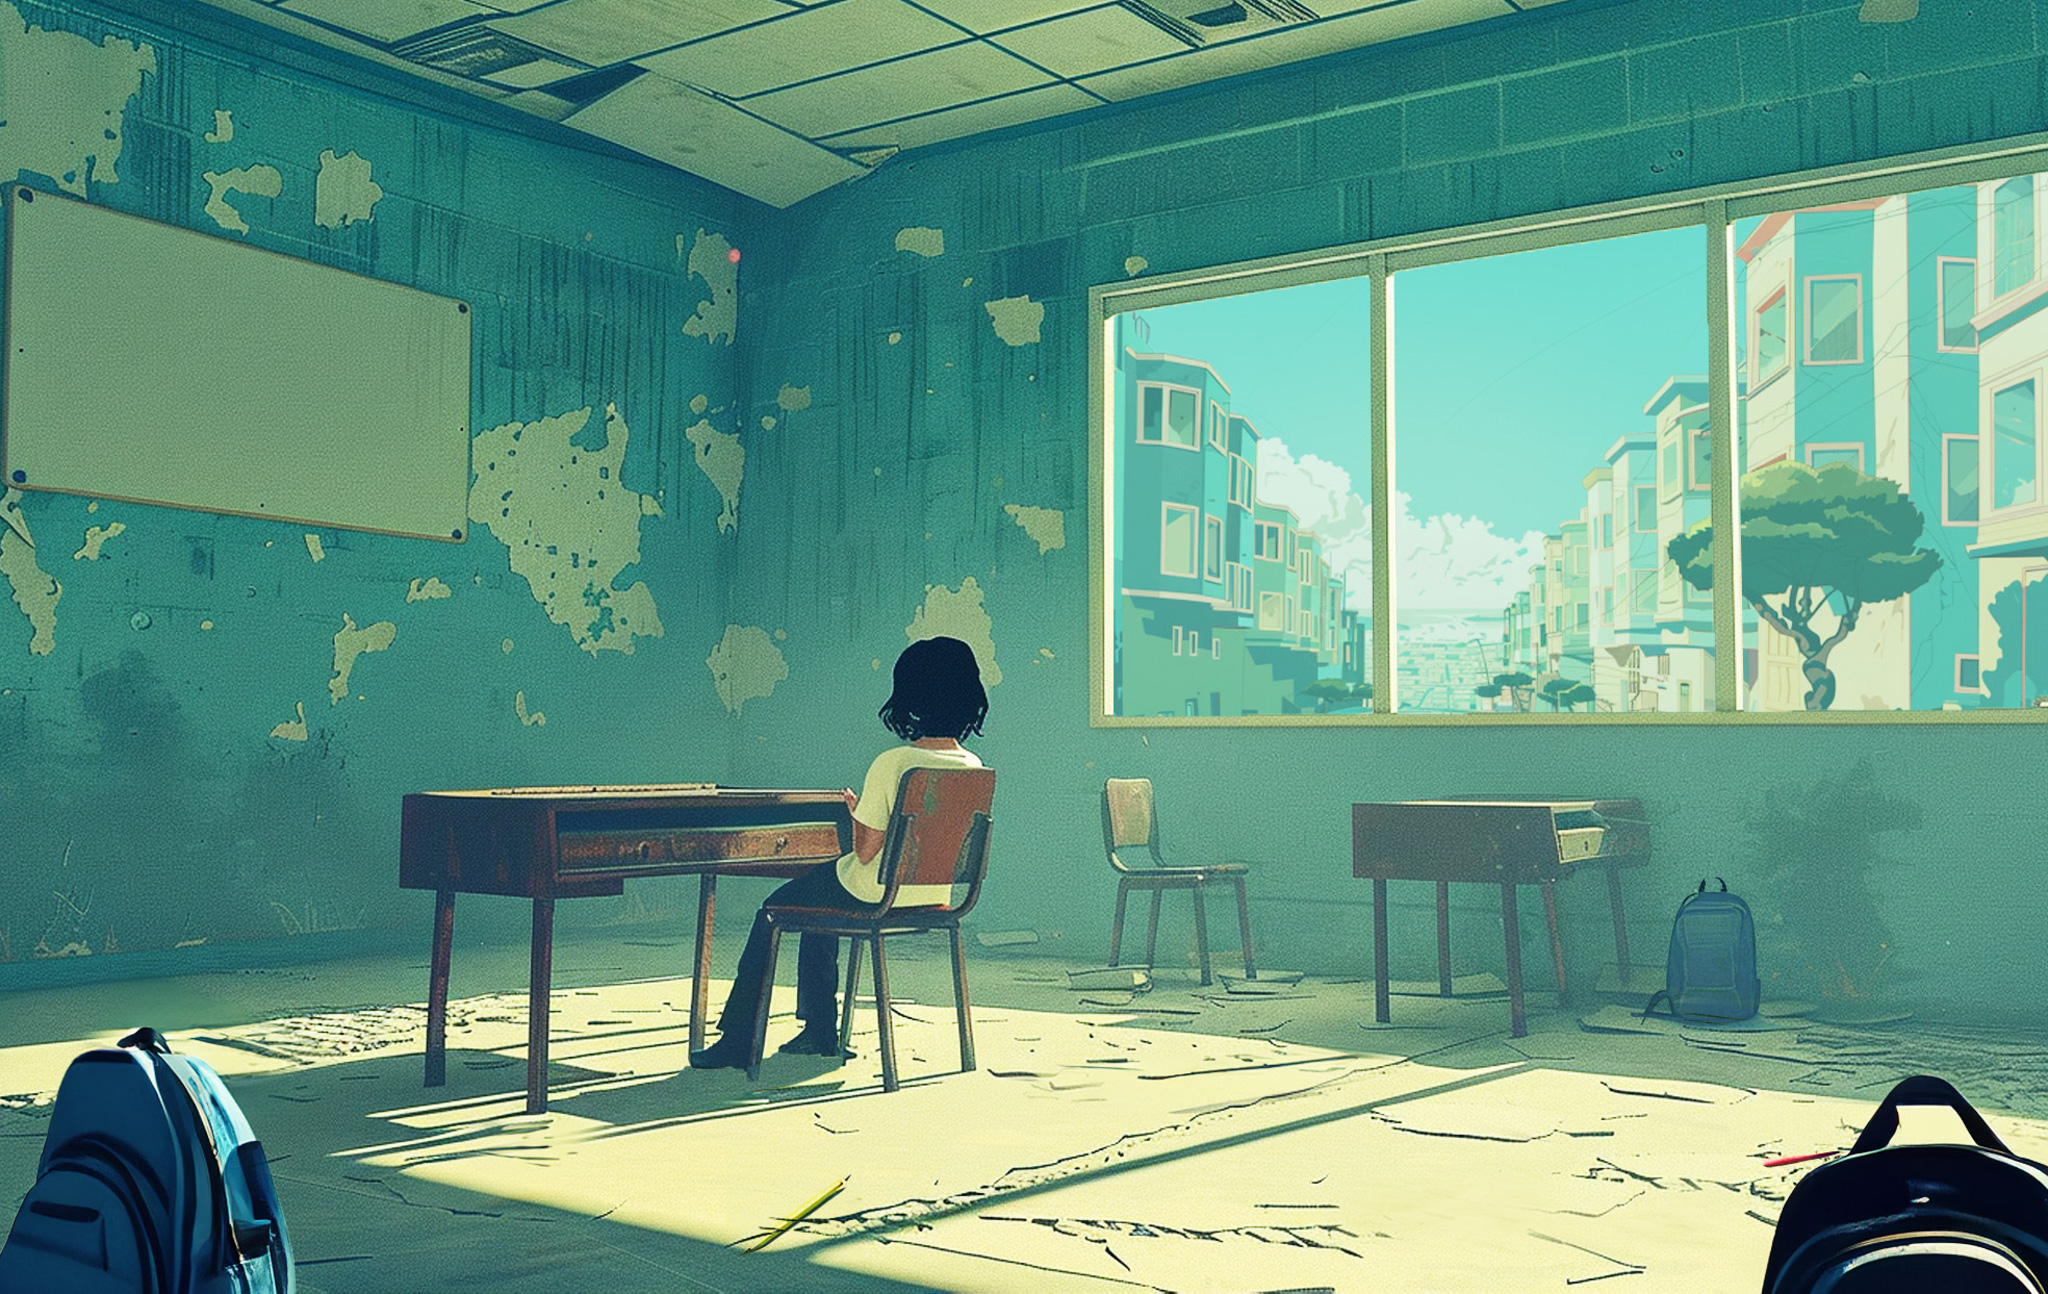 A person sits at a piano in a sunlit, dilapidated classroom with a view of urban homes outside.